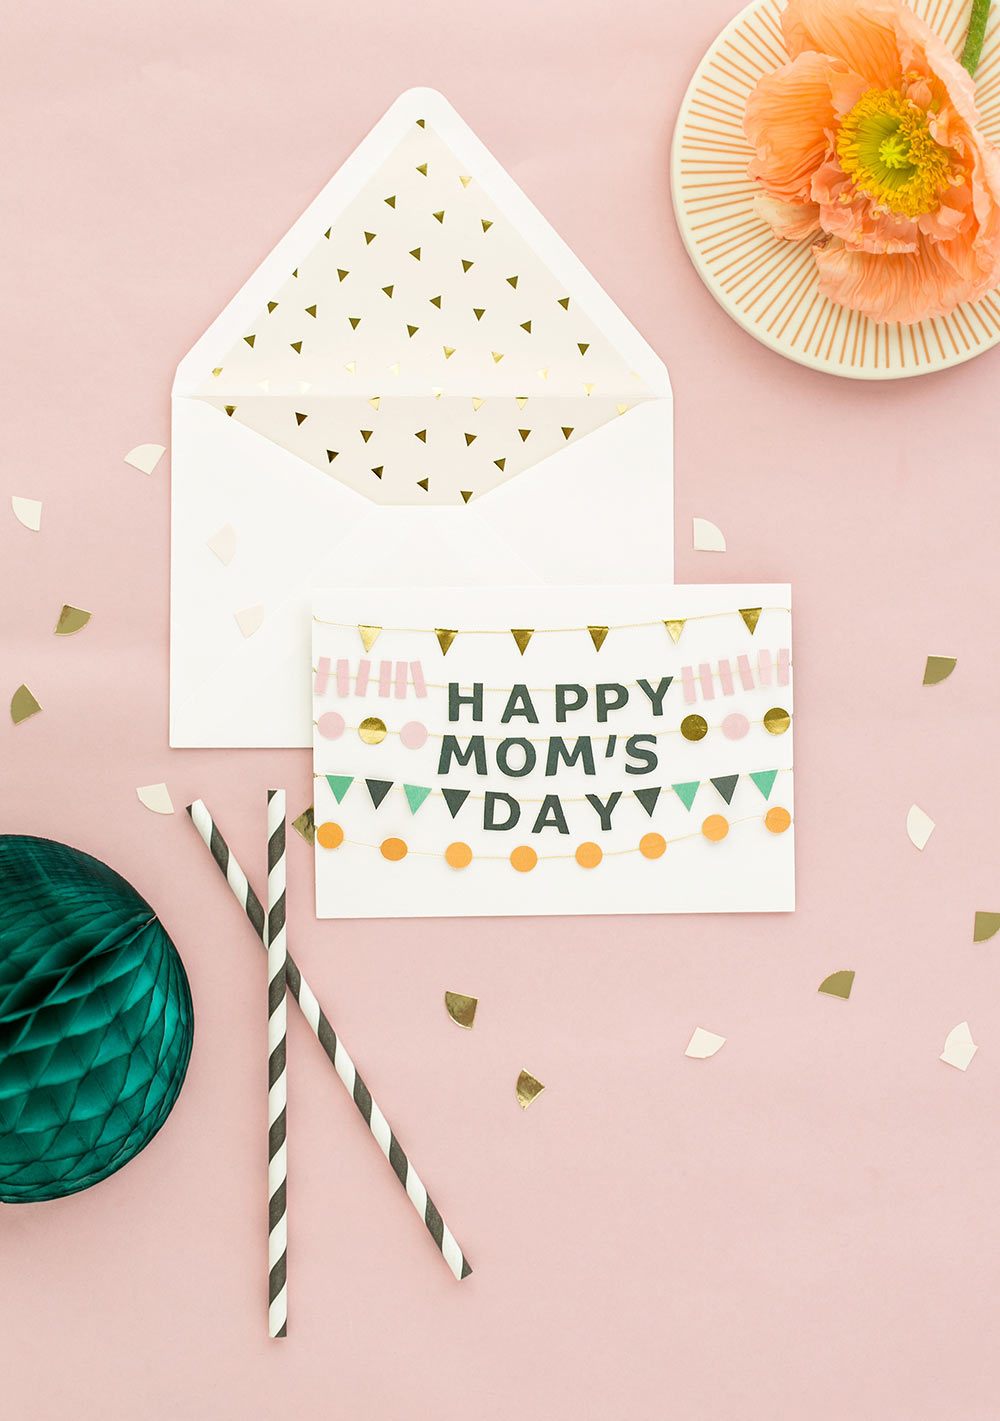 100 Layer Cake for Hallmark Signature Mother's Day cards